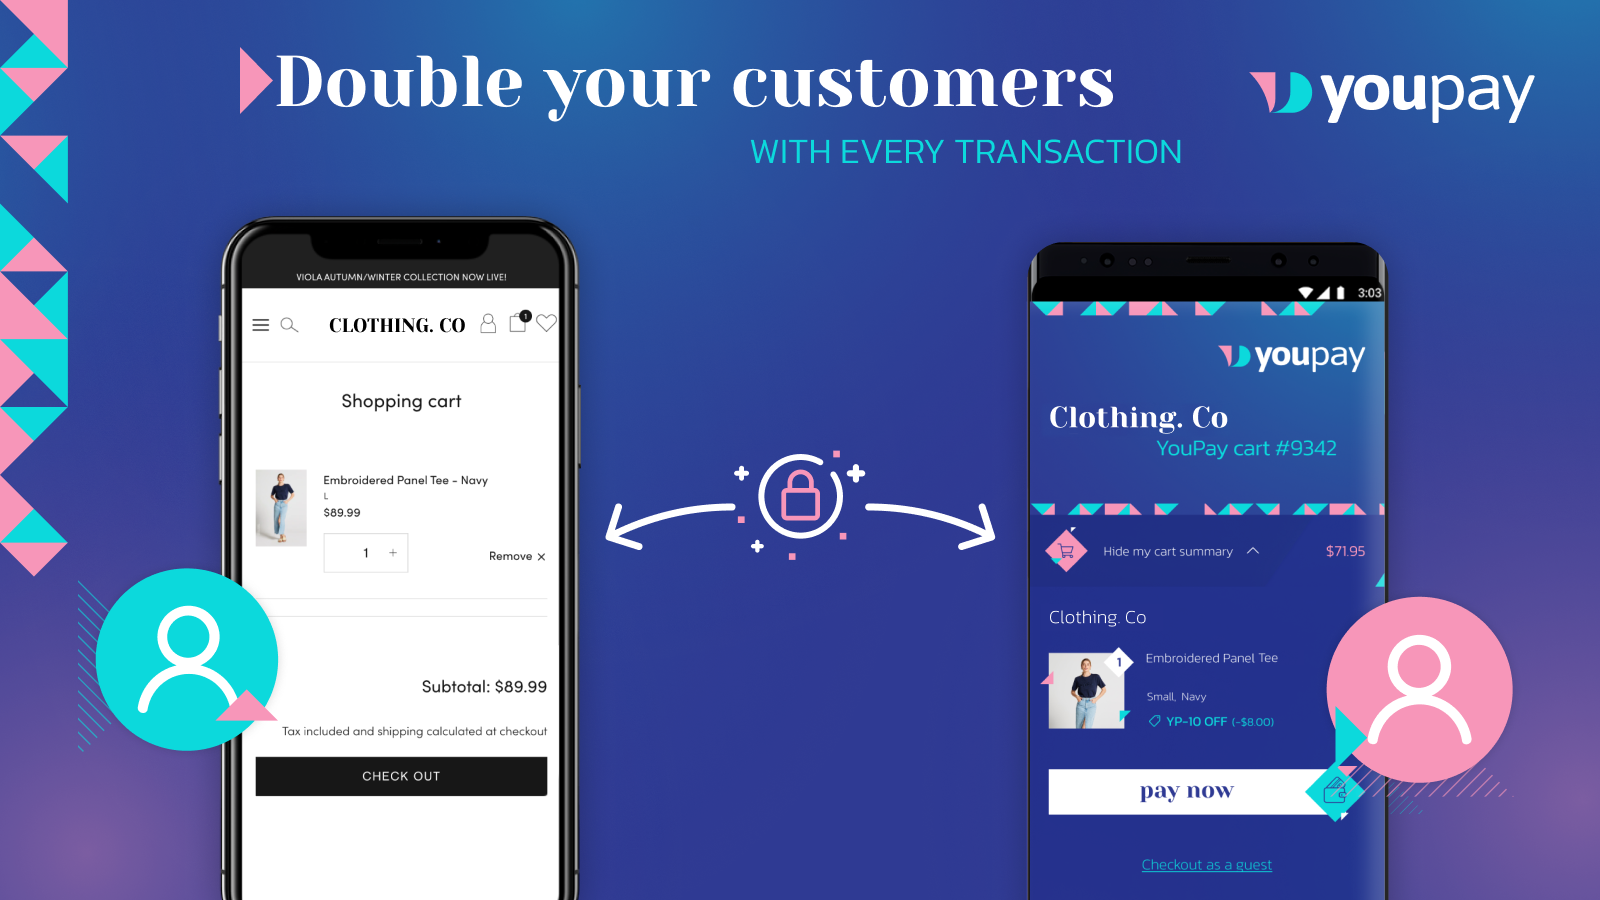 Double your customers with every transaction